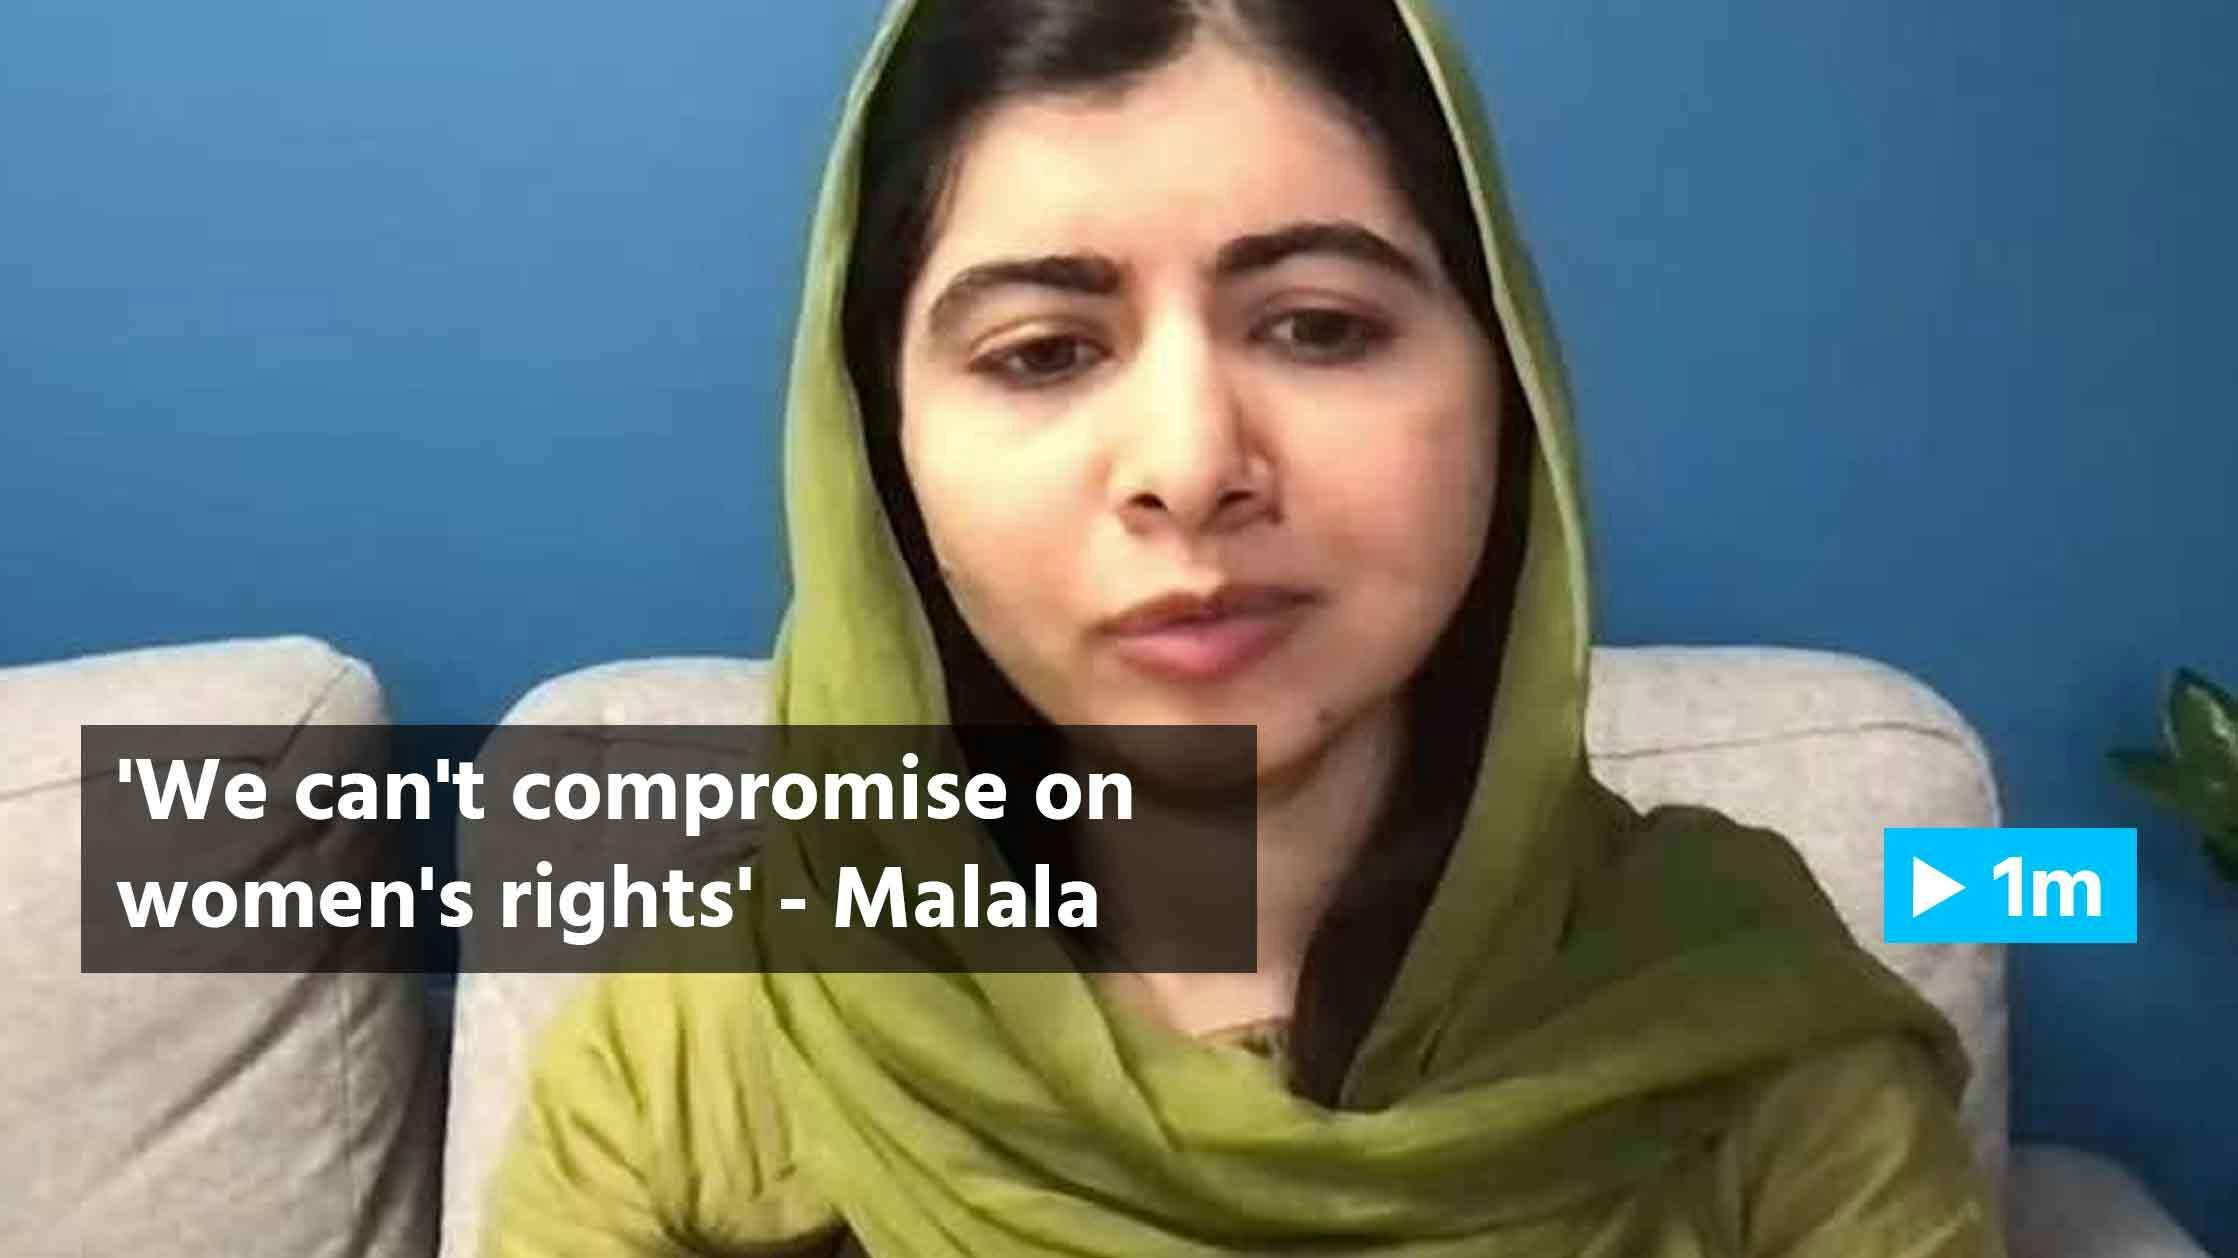 Reuters Report: 'We can't compromise on women's rights' - Malala